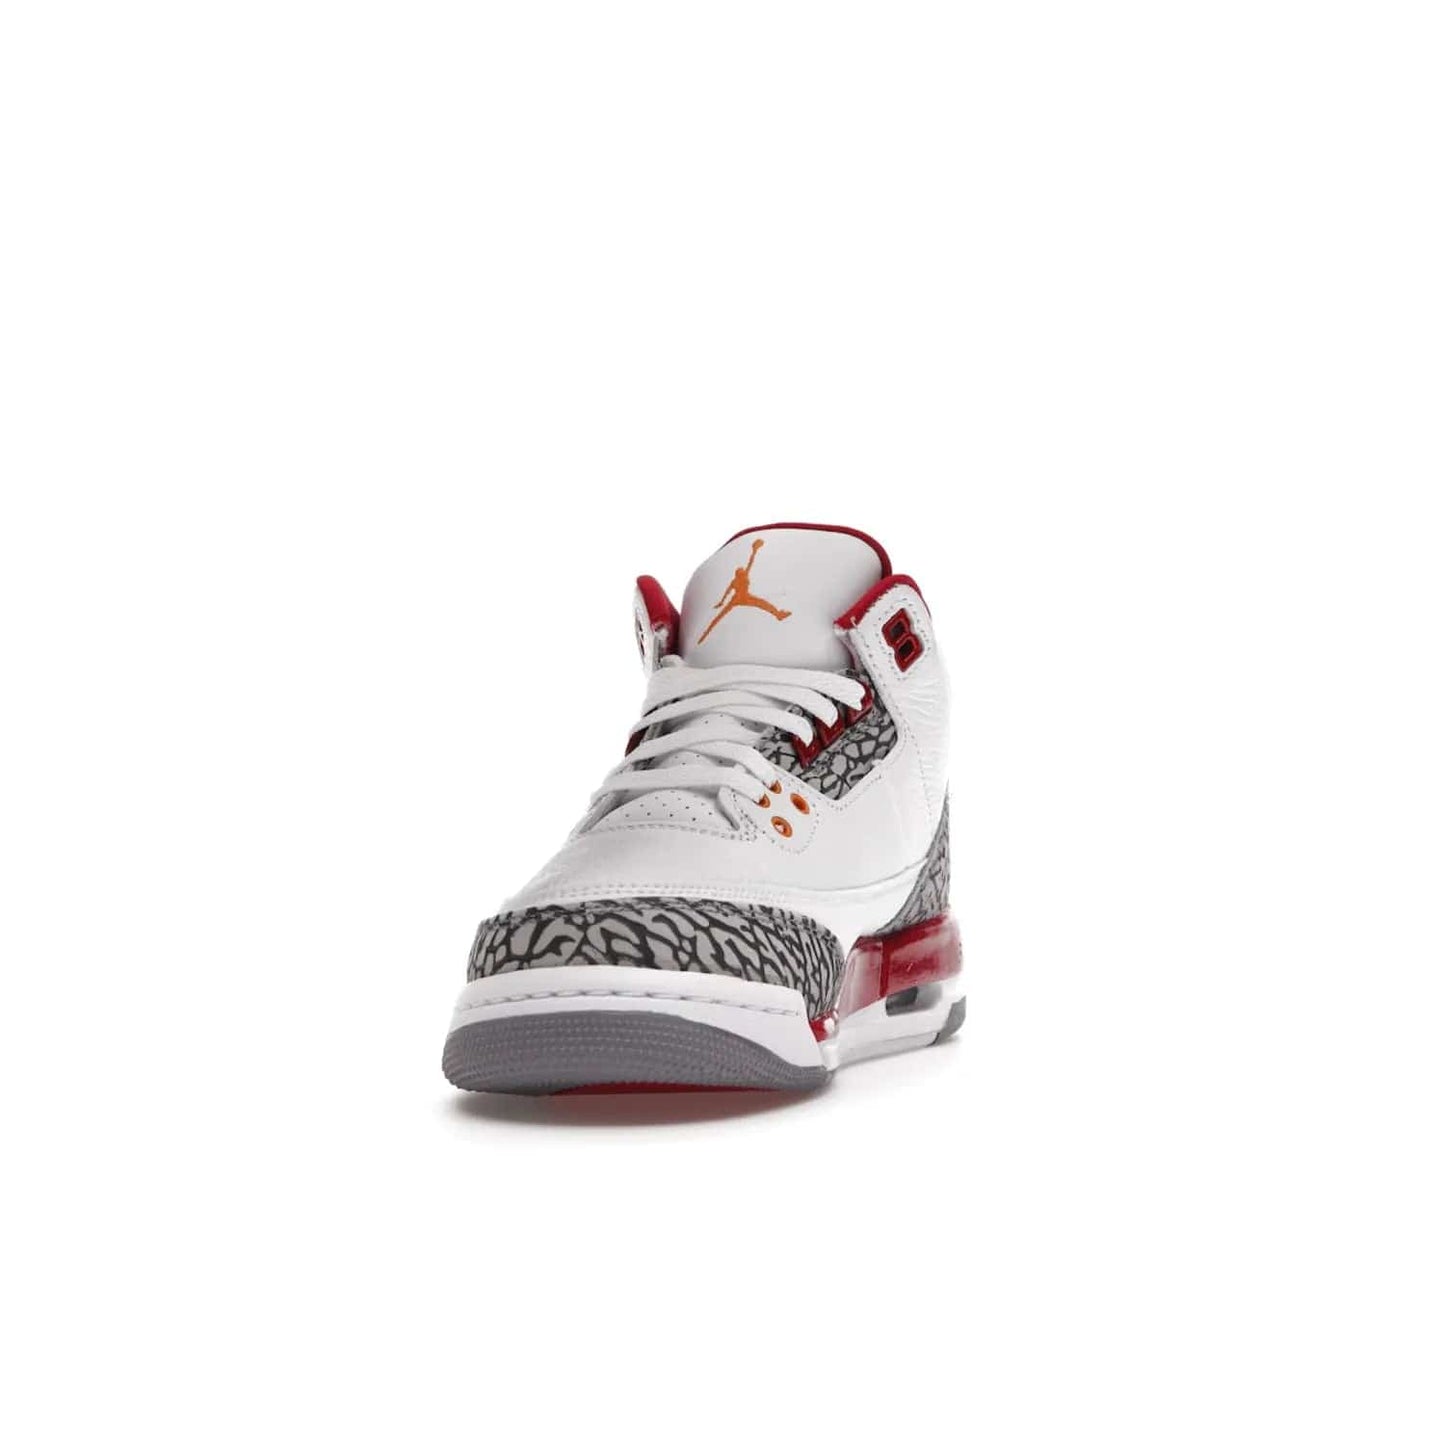 Jordan 3 Retro Cardinal (GS) - Image 12 - Only at www.BallersClubKickz.com - Shop the kid-sized Air Jordan 3 Retro Cardinal GS, released Feb 2022. White tumbled leather upper, light curry accenting, cement grey and classic red details throughout. Visible Air cushioning, midsole, and an eye-catching outsole. Show off your style with this fashionable streetwear silhouette.